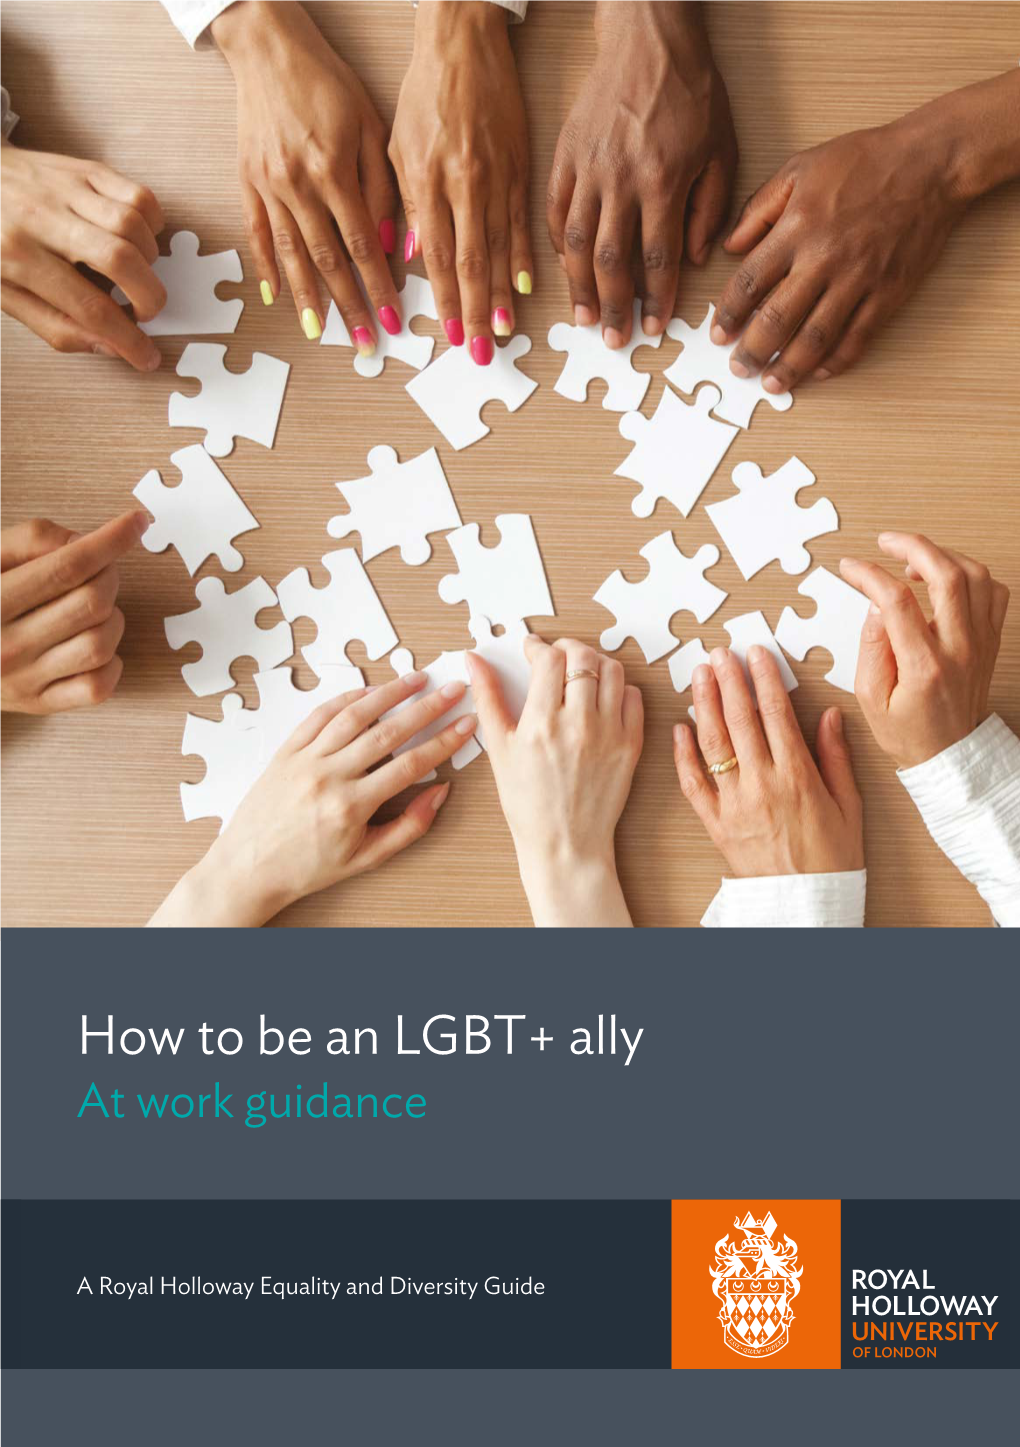 How to Be an LGBT+ Ally at Work Guidance